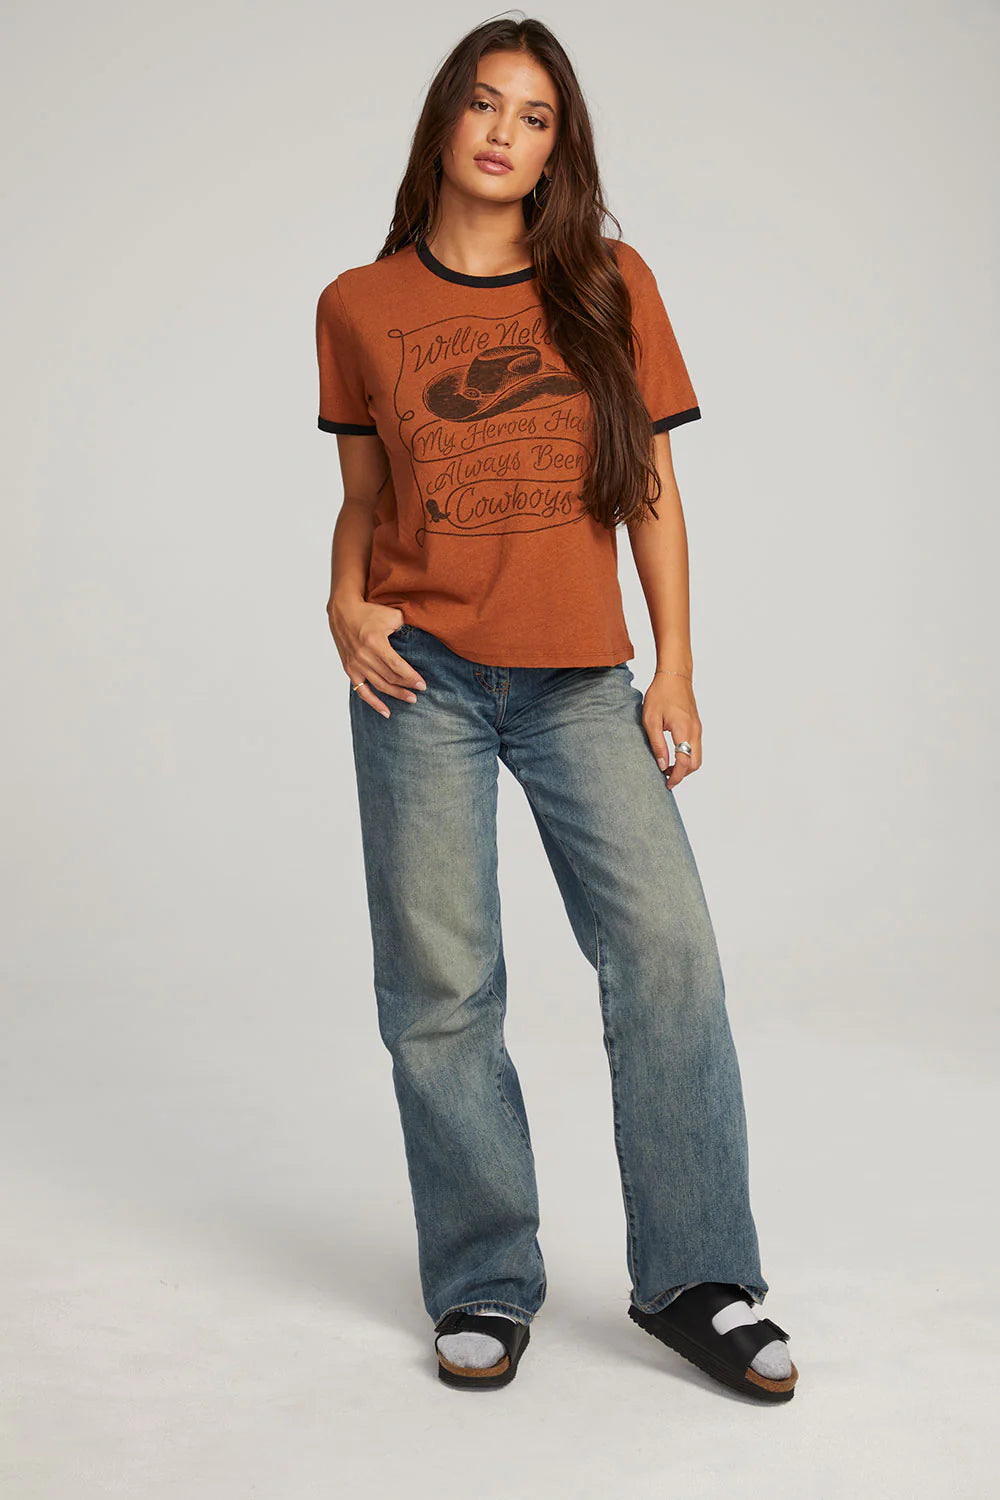 Willie Nelson Cowboys Tee - Whiskey